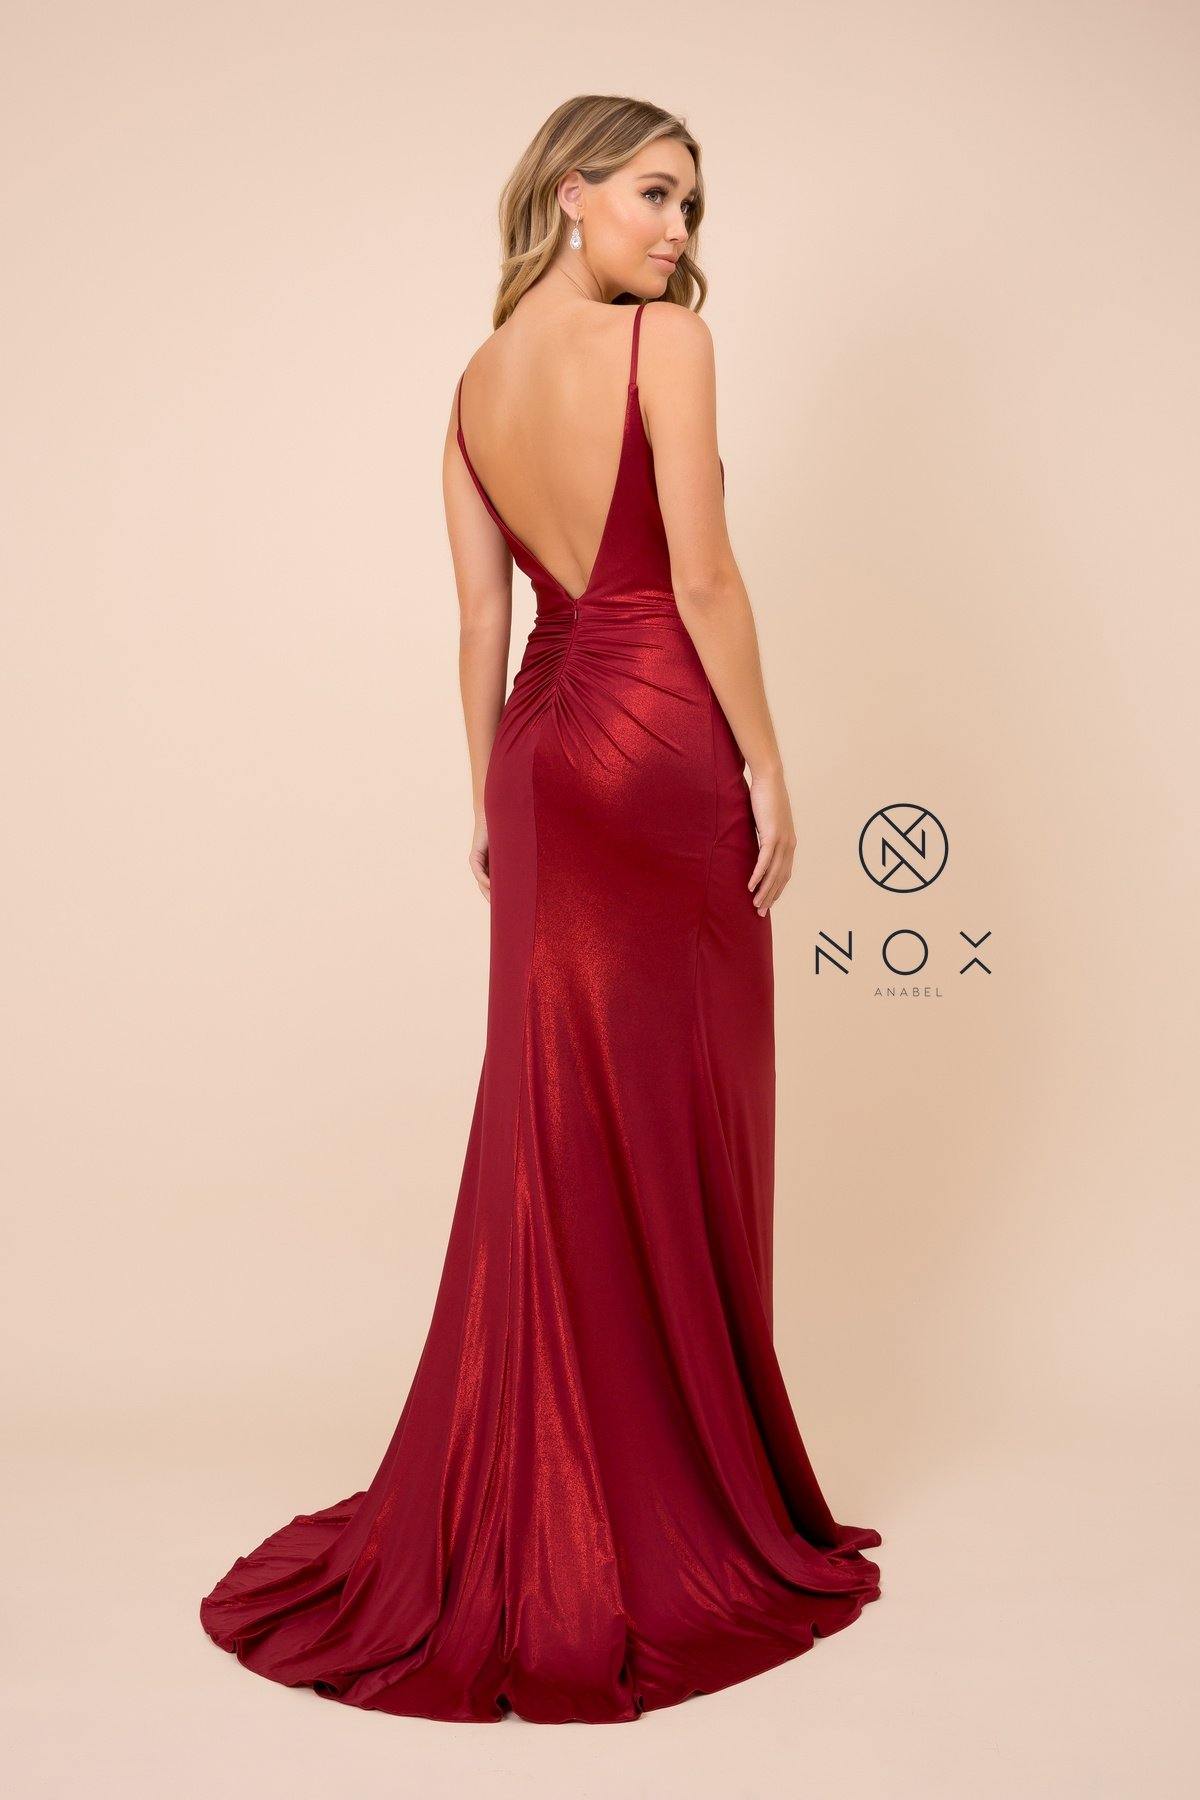 Long Formal Spaghetti Strap Fitted Metallic Dress - The Dress Outlet Nox Anabel